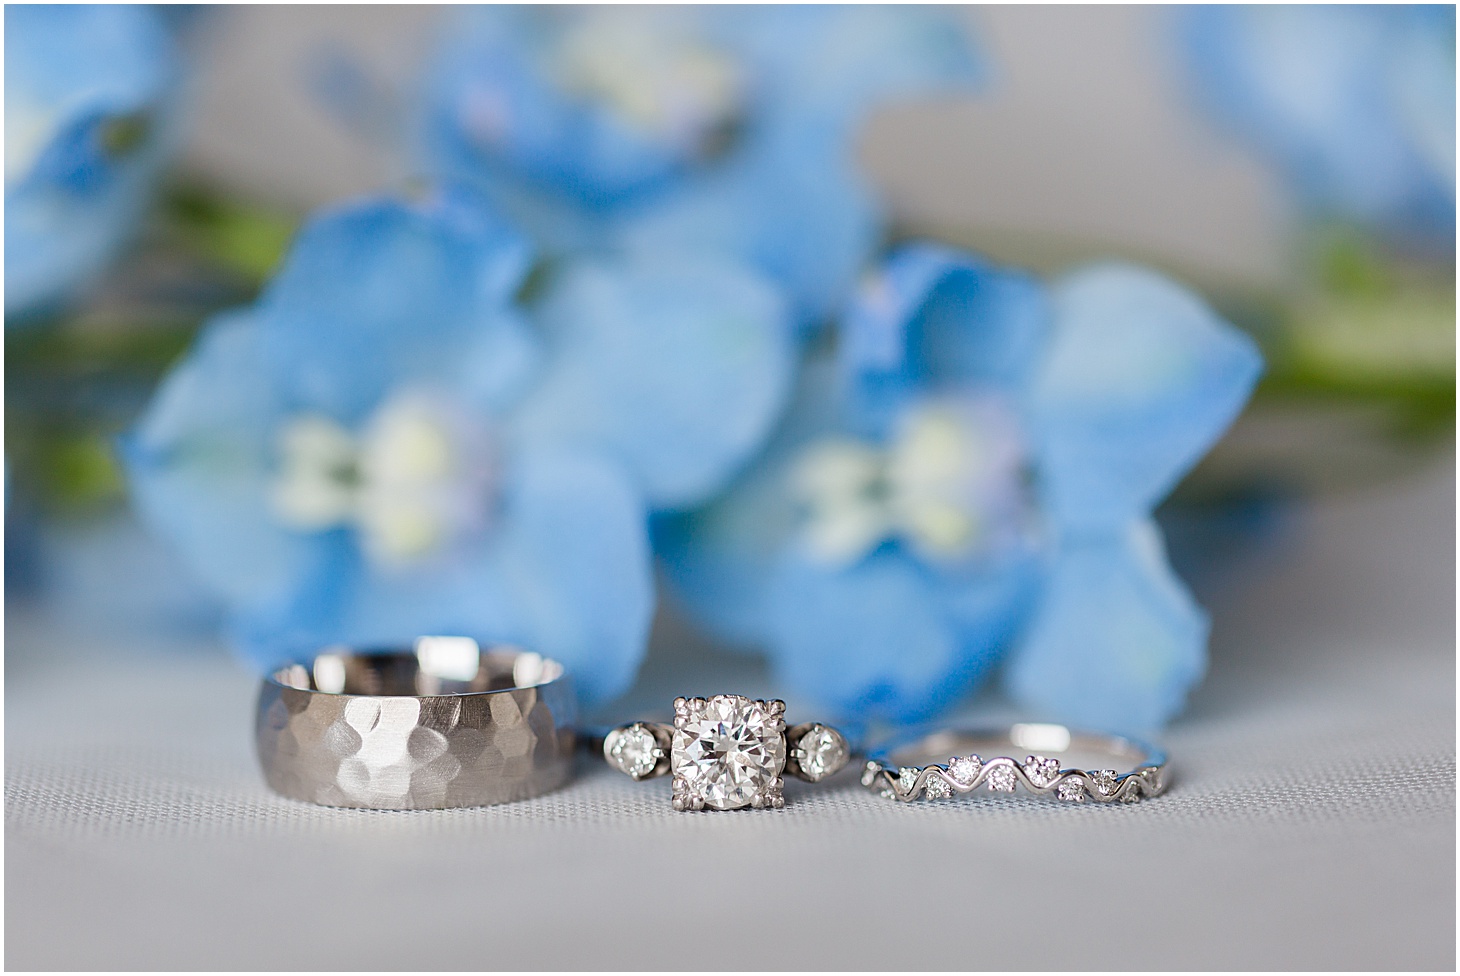 Heirloom Engagement Ring and Wedding Bands at Kimpton Donovan Hotel, Dusty Blue and Pink Jewish Wedding at Women in the Arts, Sarah Bradshaw Photography, DC Wedding Photographer 